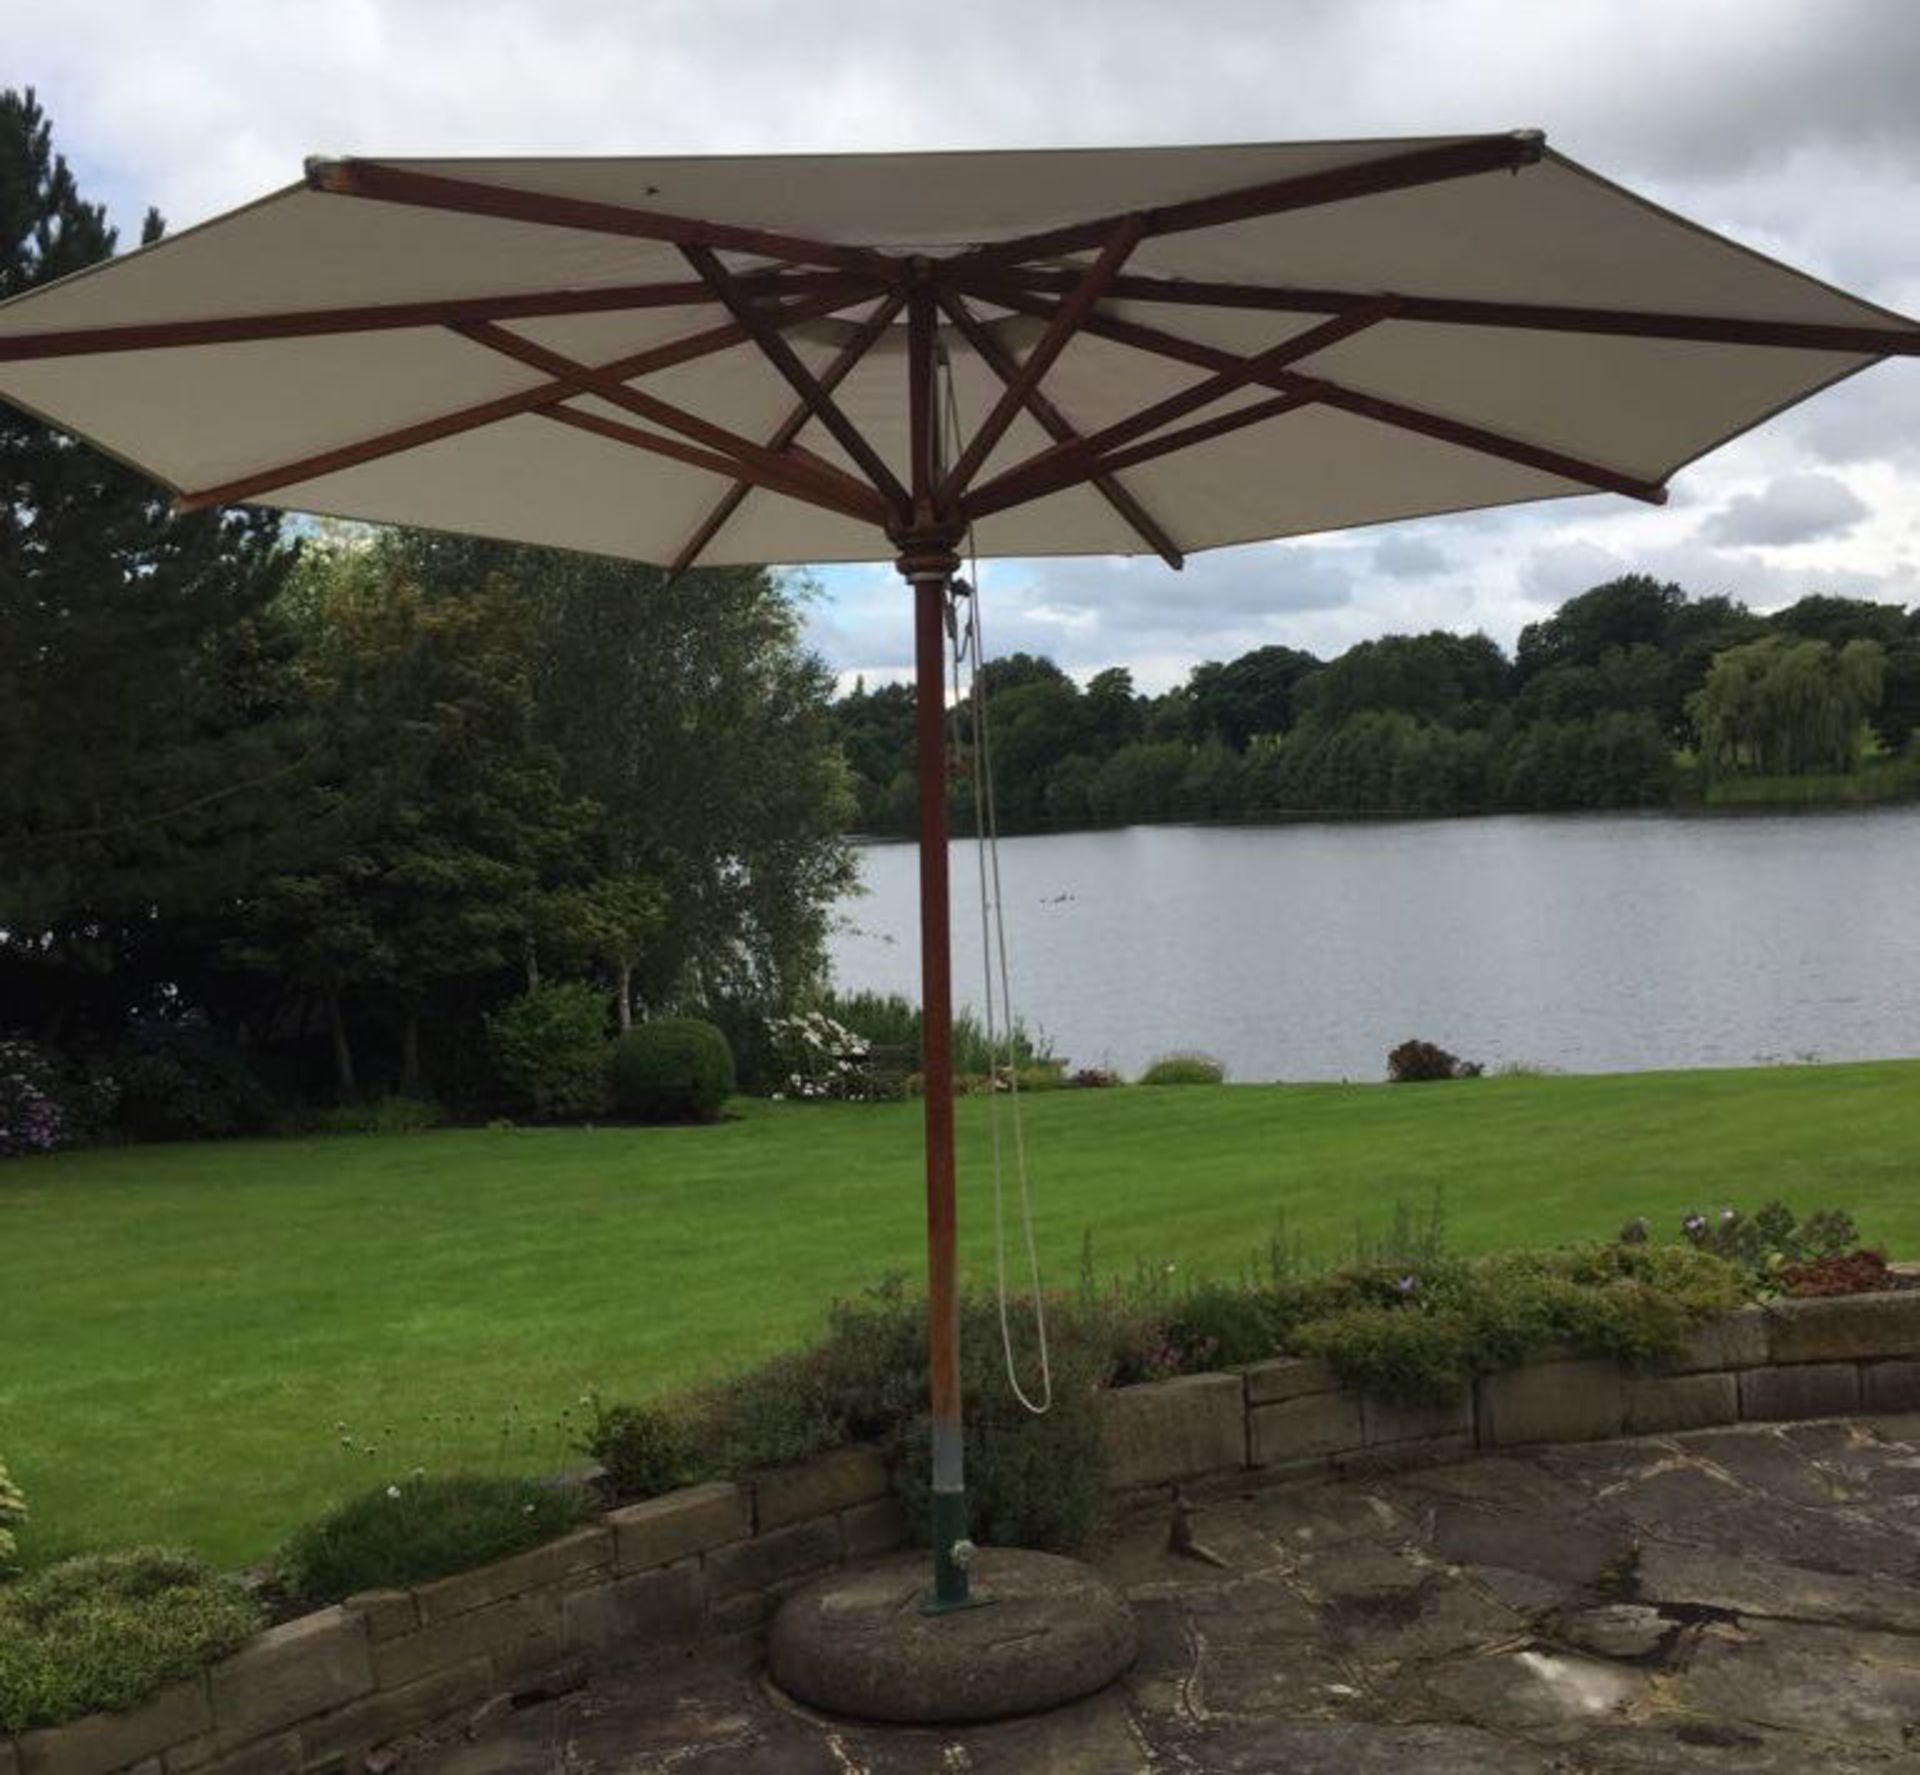 1 x Large Indian Ocean Sun Parasol with Heavy Base - Approx 8 Foot High - CL226 - Location: